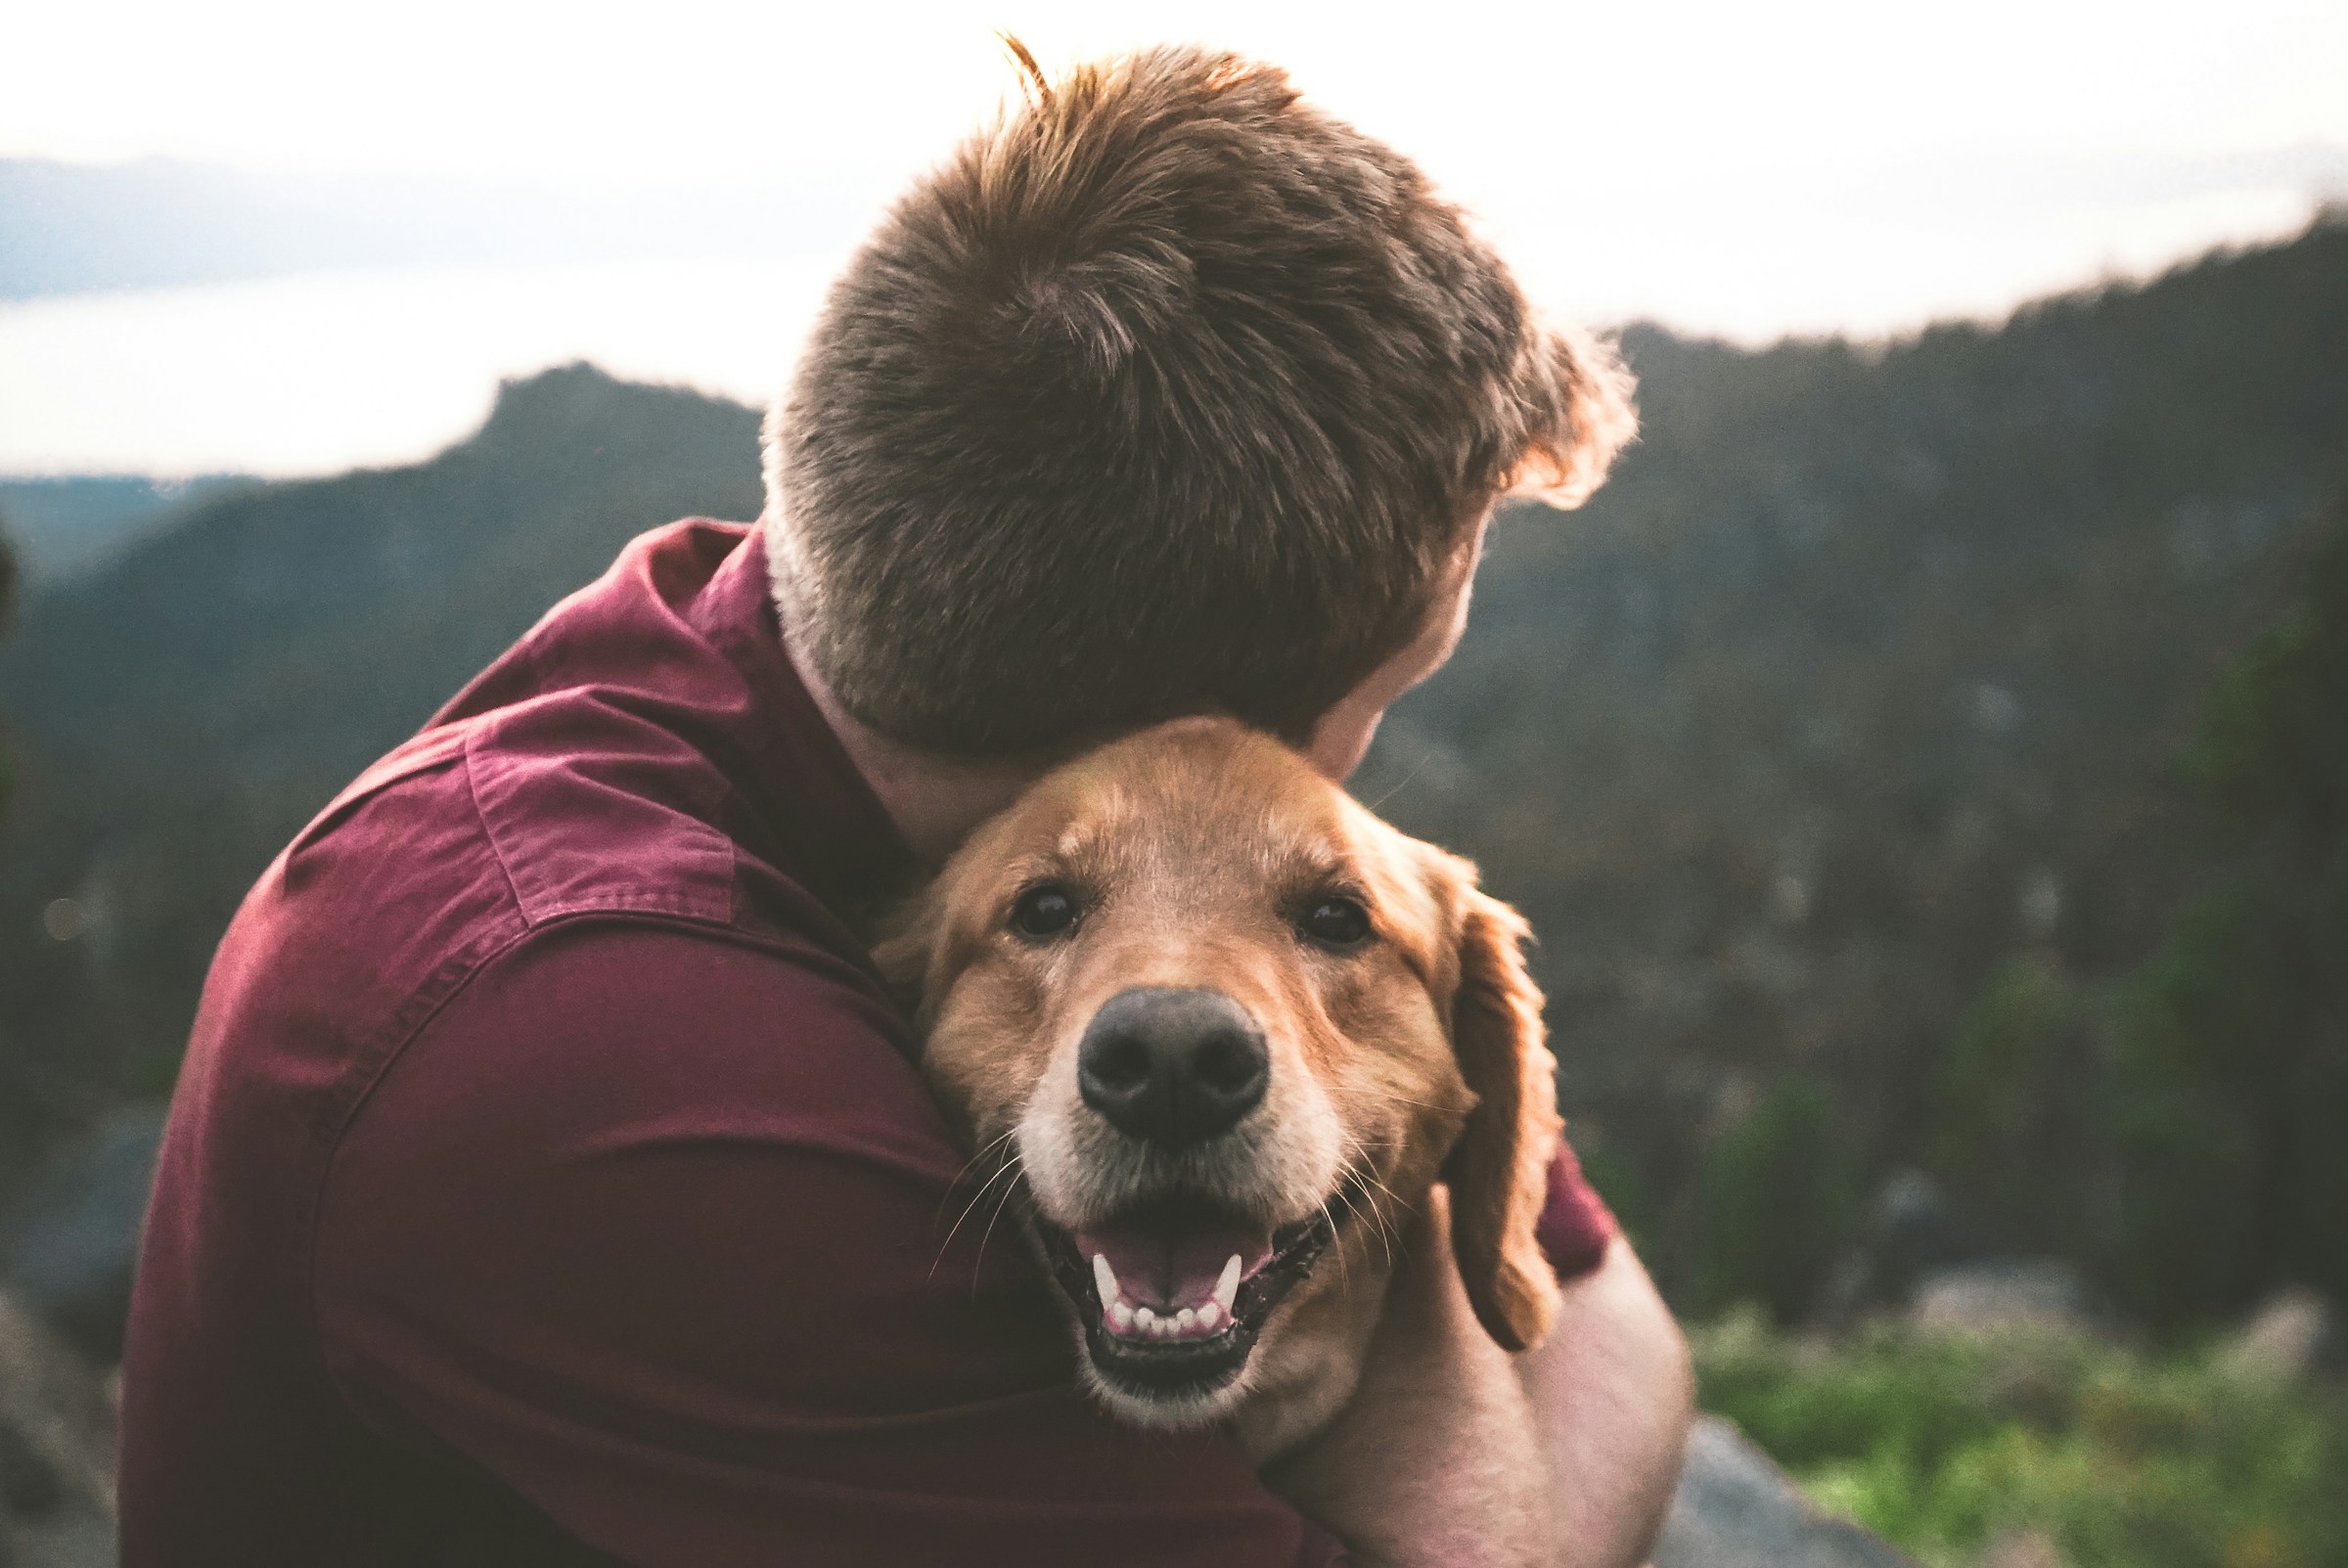 Exploring the deep bond between pet and owner during a comforting hug. 🐾💖 Discover how our Pet Oral Surgery Guide helps ensure their health and happiness. 📖 #PetLove #PetHealth Photo by Eric Ward, Unsplash.